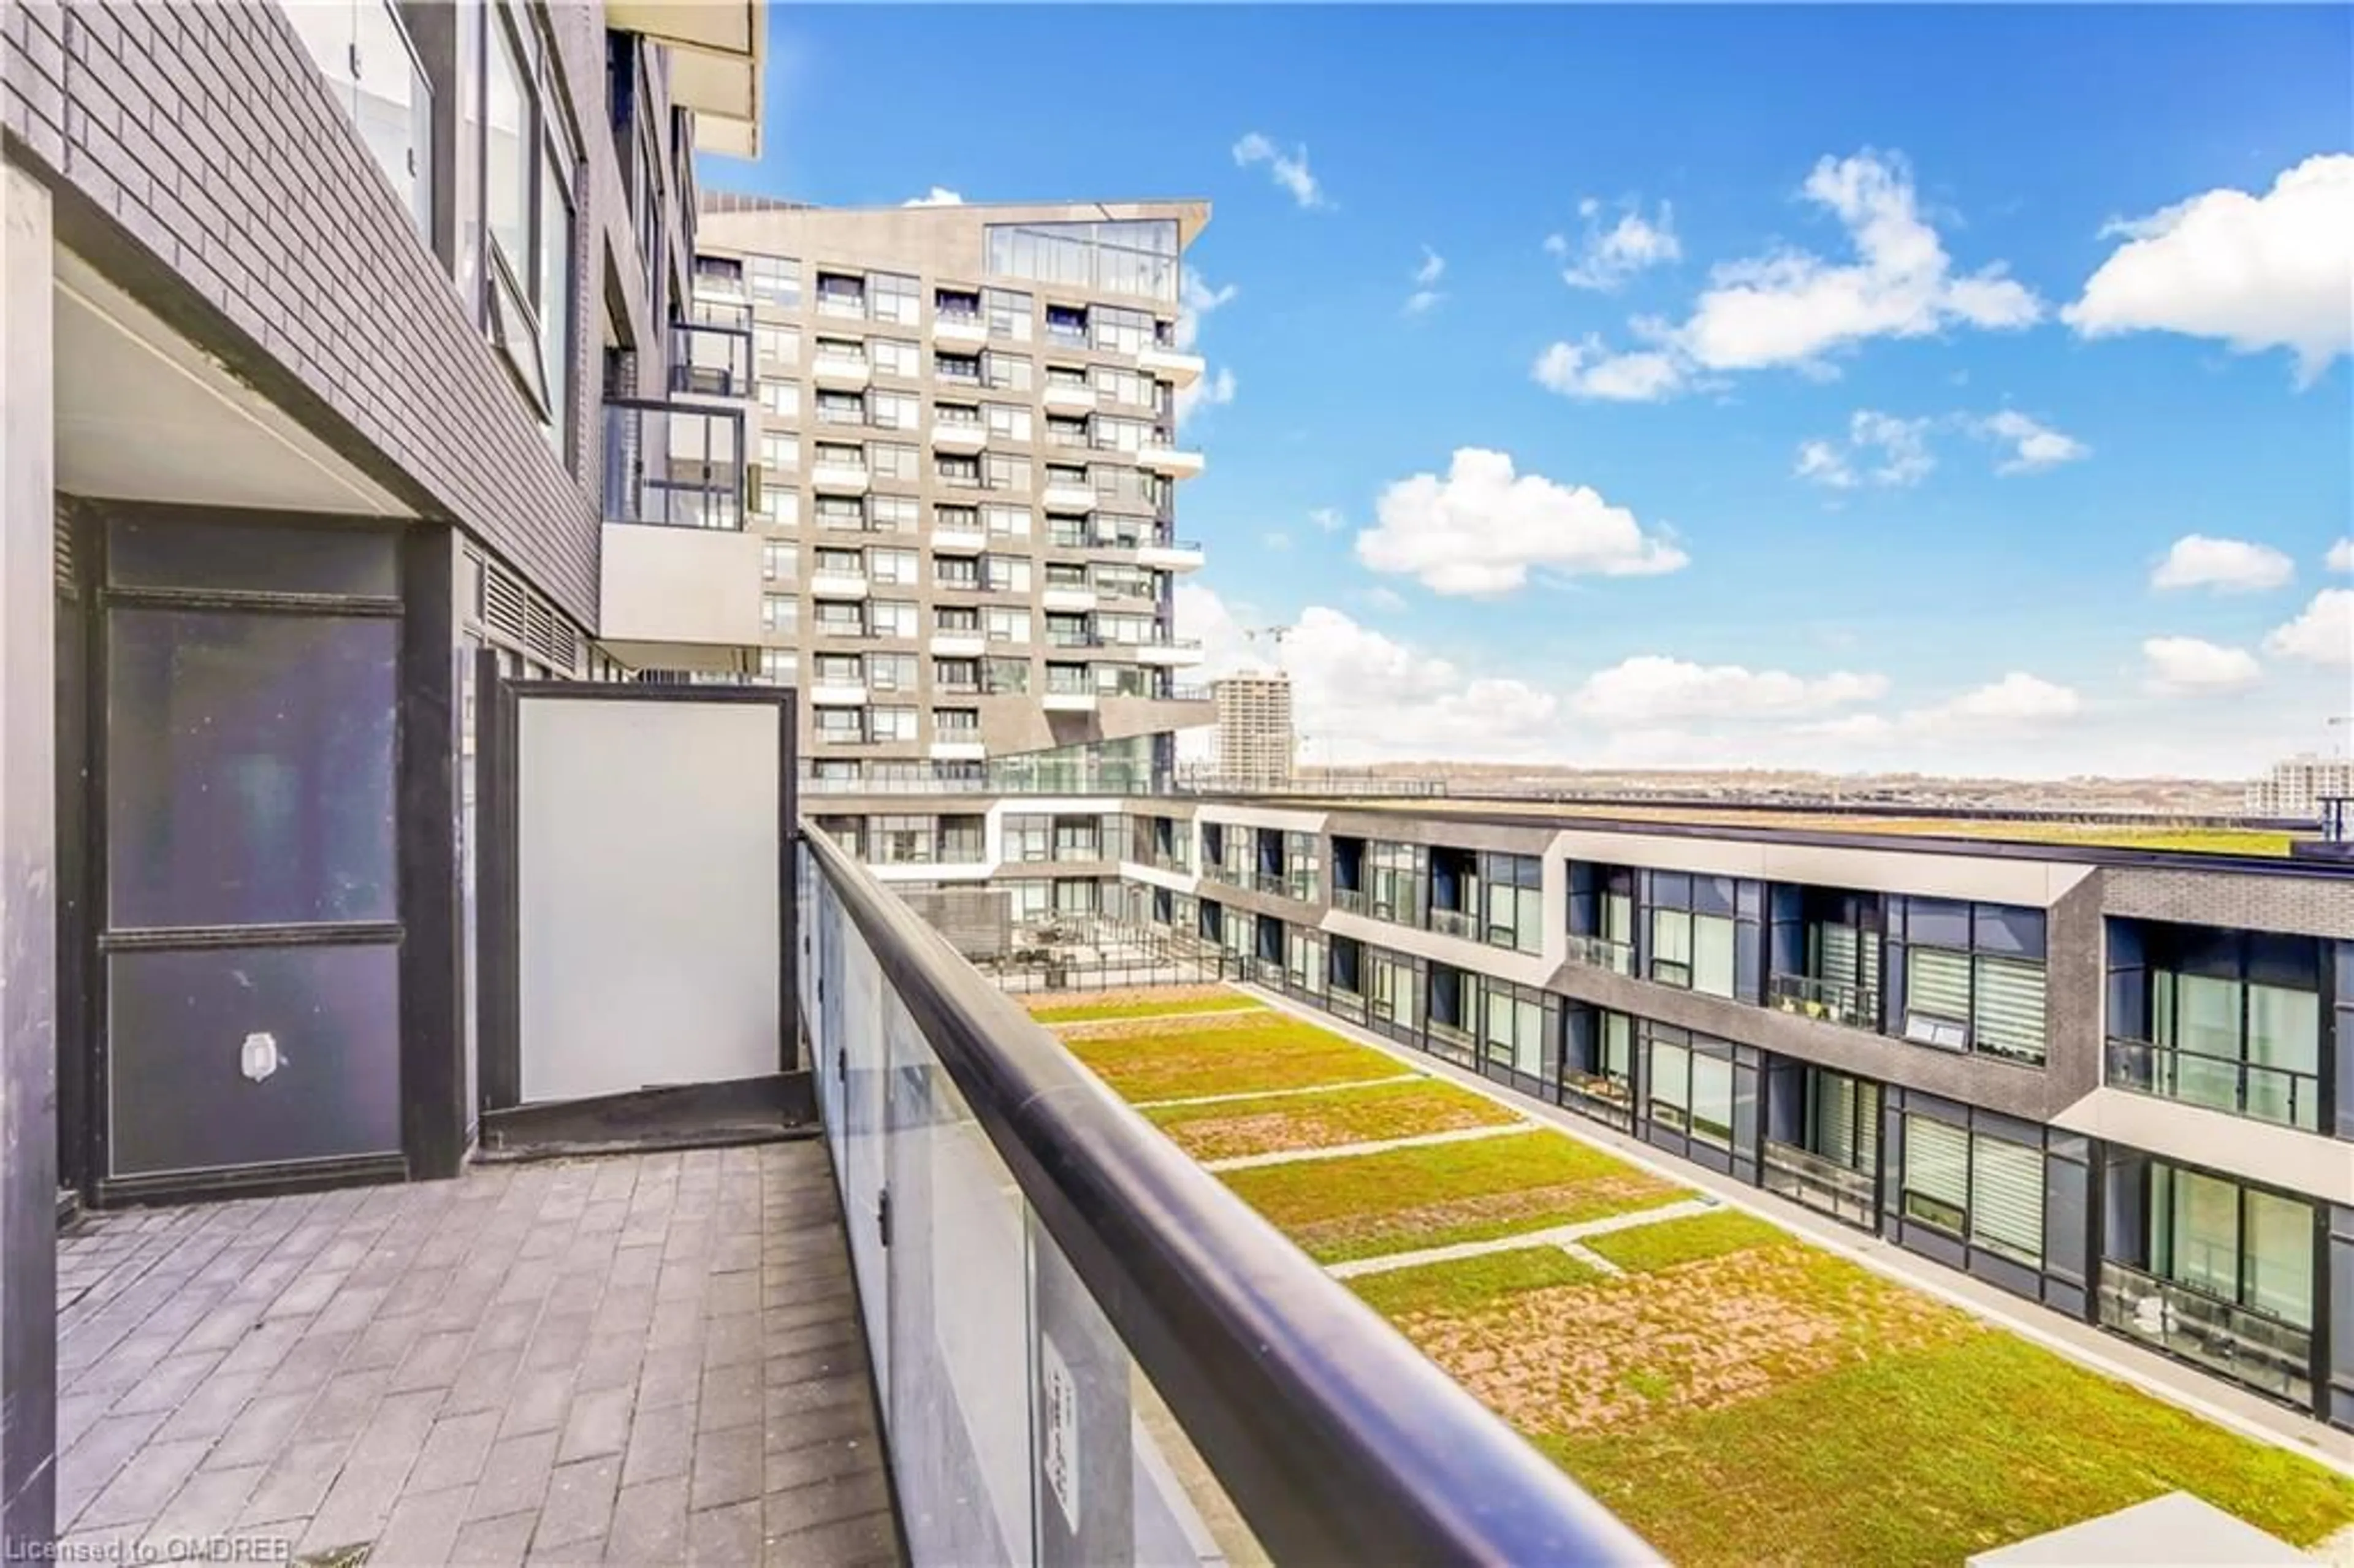 Balcony in the apartment for 2481 Taunton Rd #501, Oakville Ontario L6H 3R7